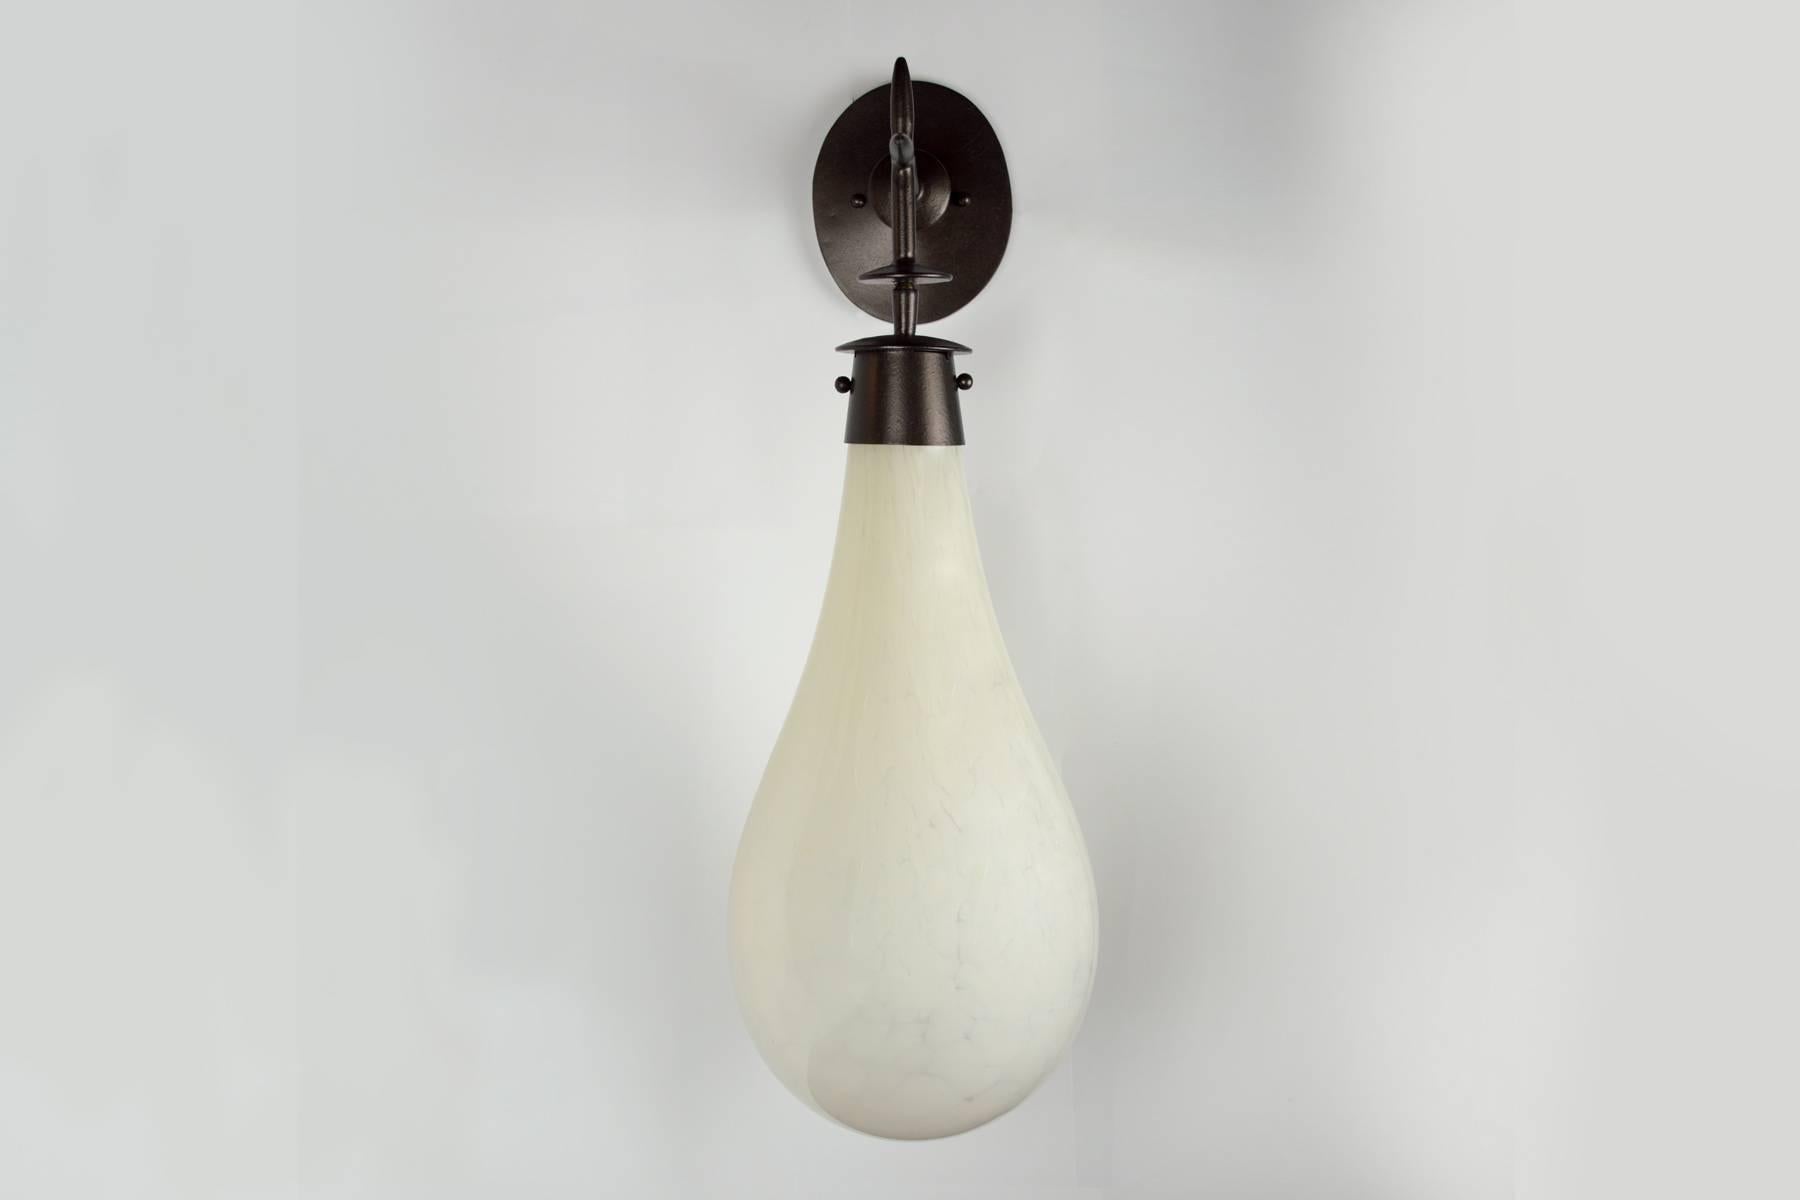 These large-scale sconce have large handblown glass drops which are mounted on a bronze wall mount. Lights are sold with either a white fret or amber colored glass. Each drop is handblown and unique. Lights mount to a standard J box and have one